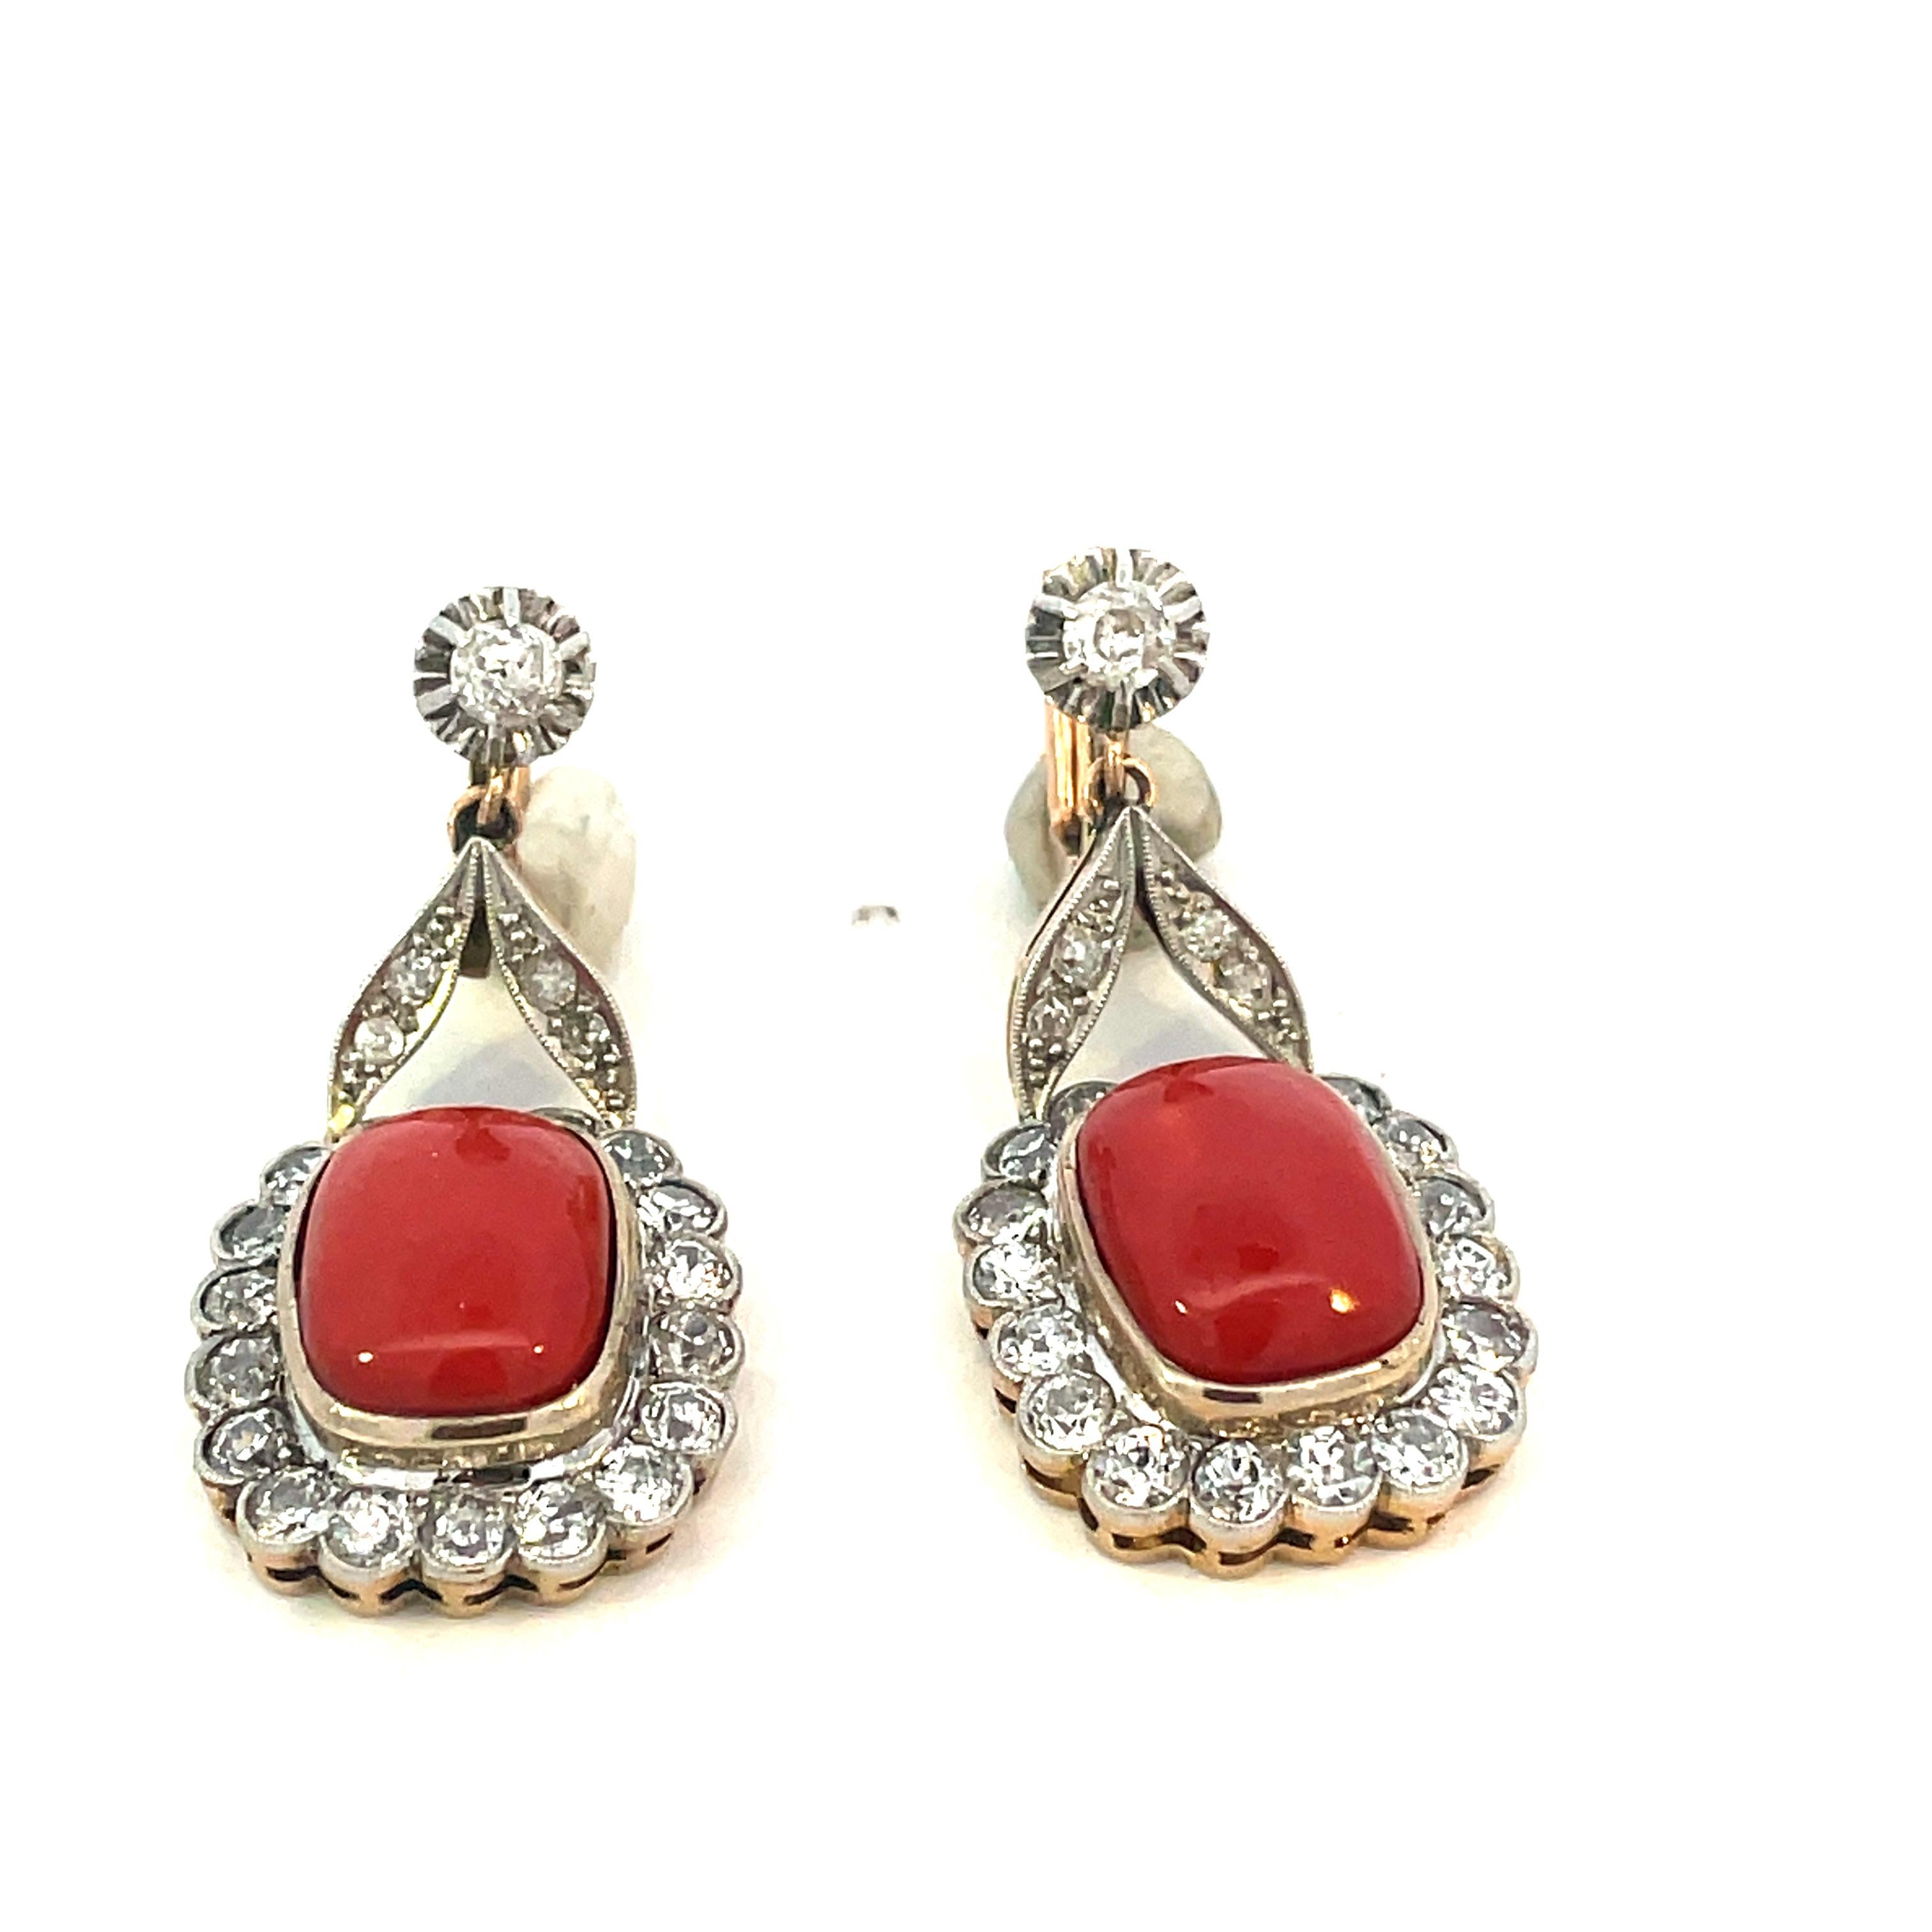 Edwardian Coral and Diamond antique earrings 